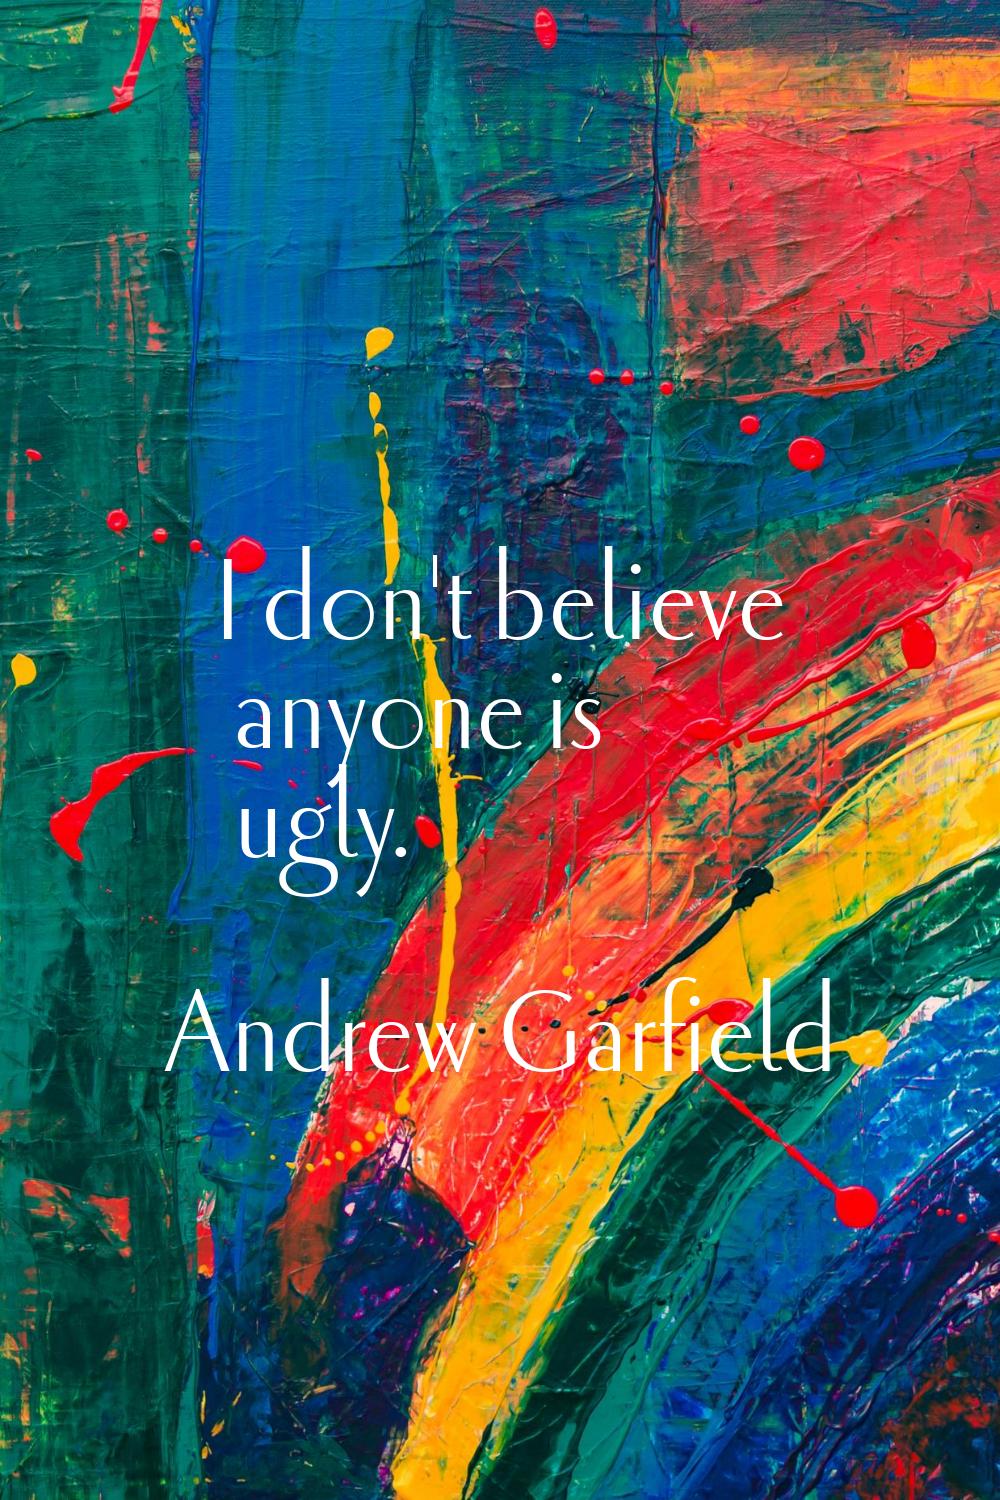 I don't believe anyone is ugly.